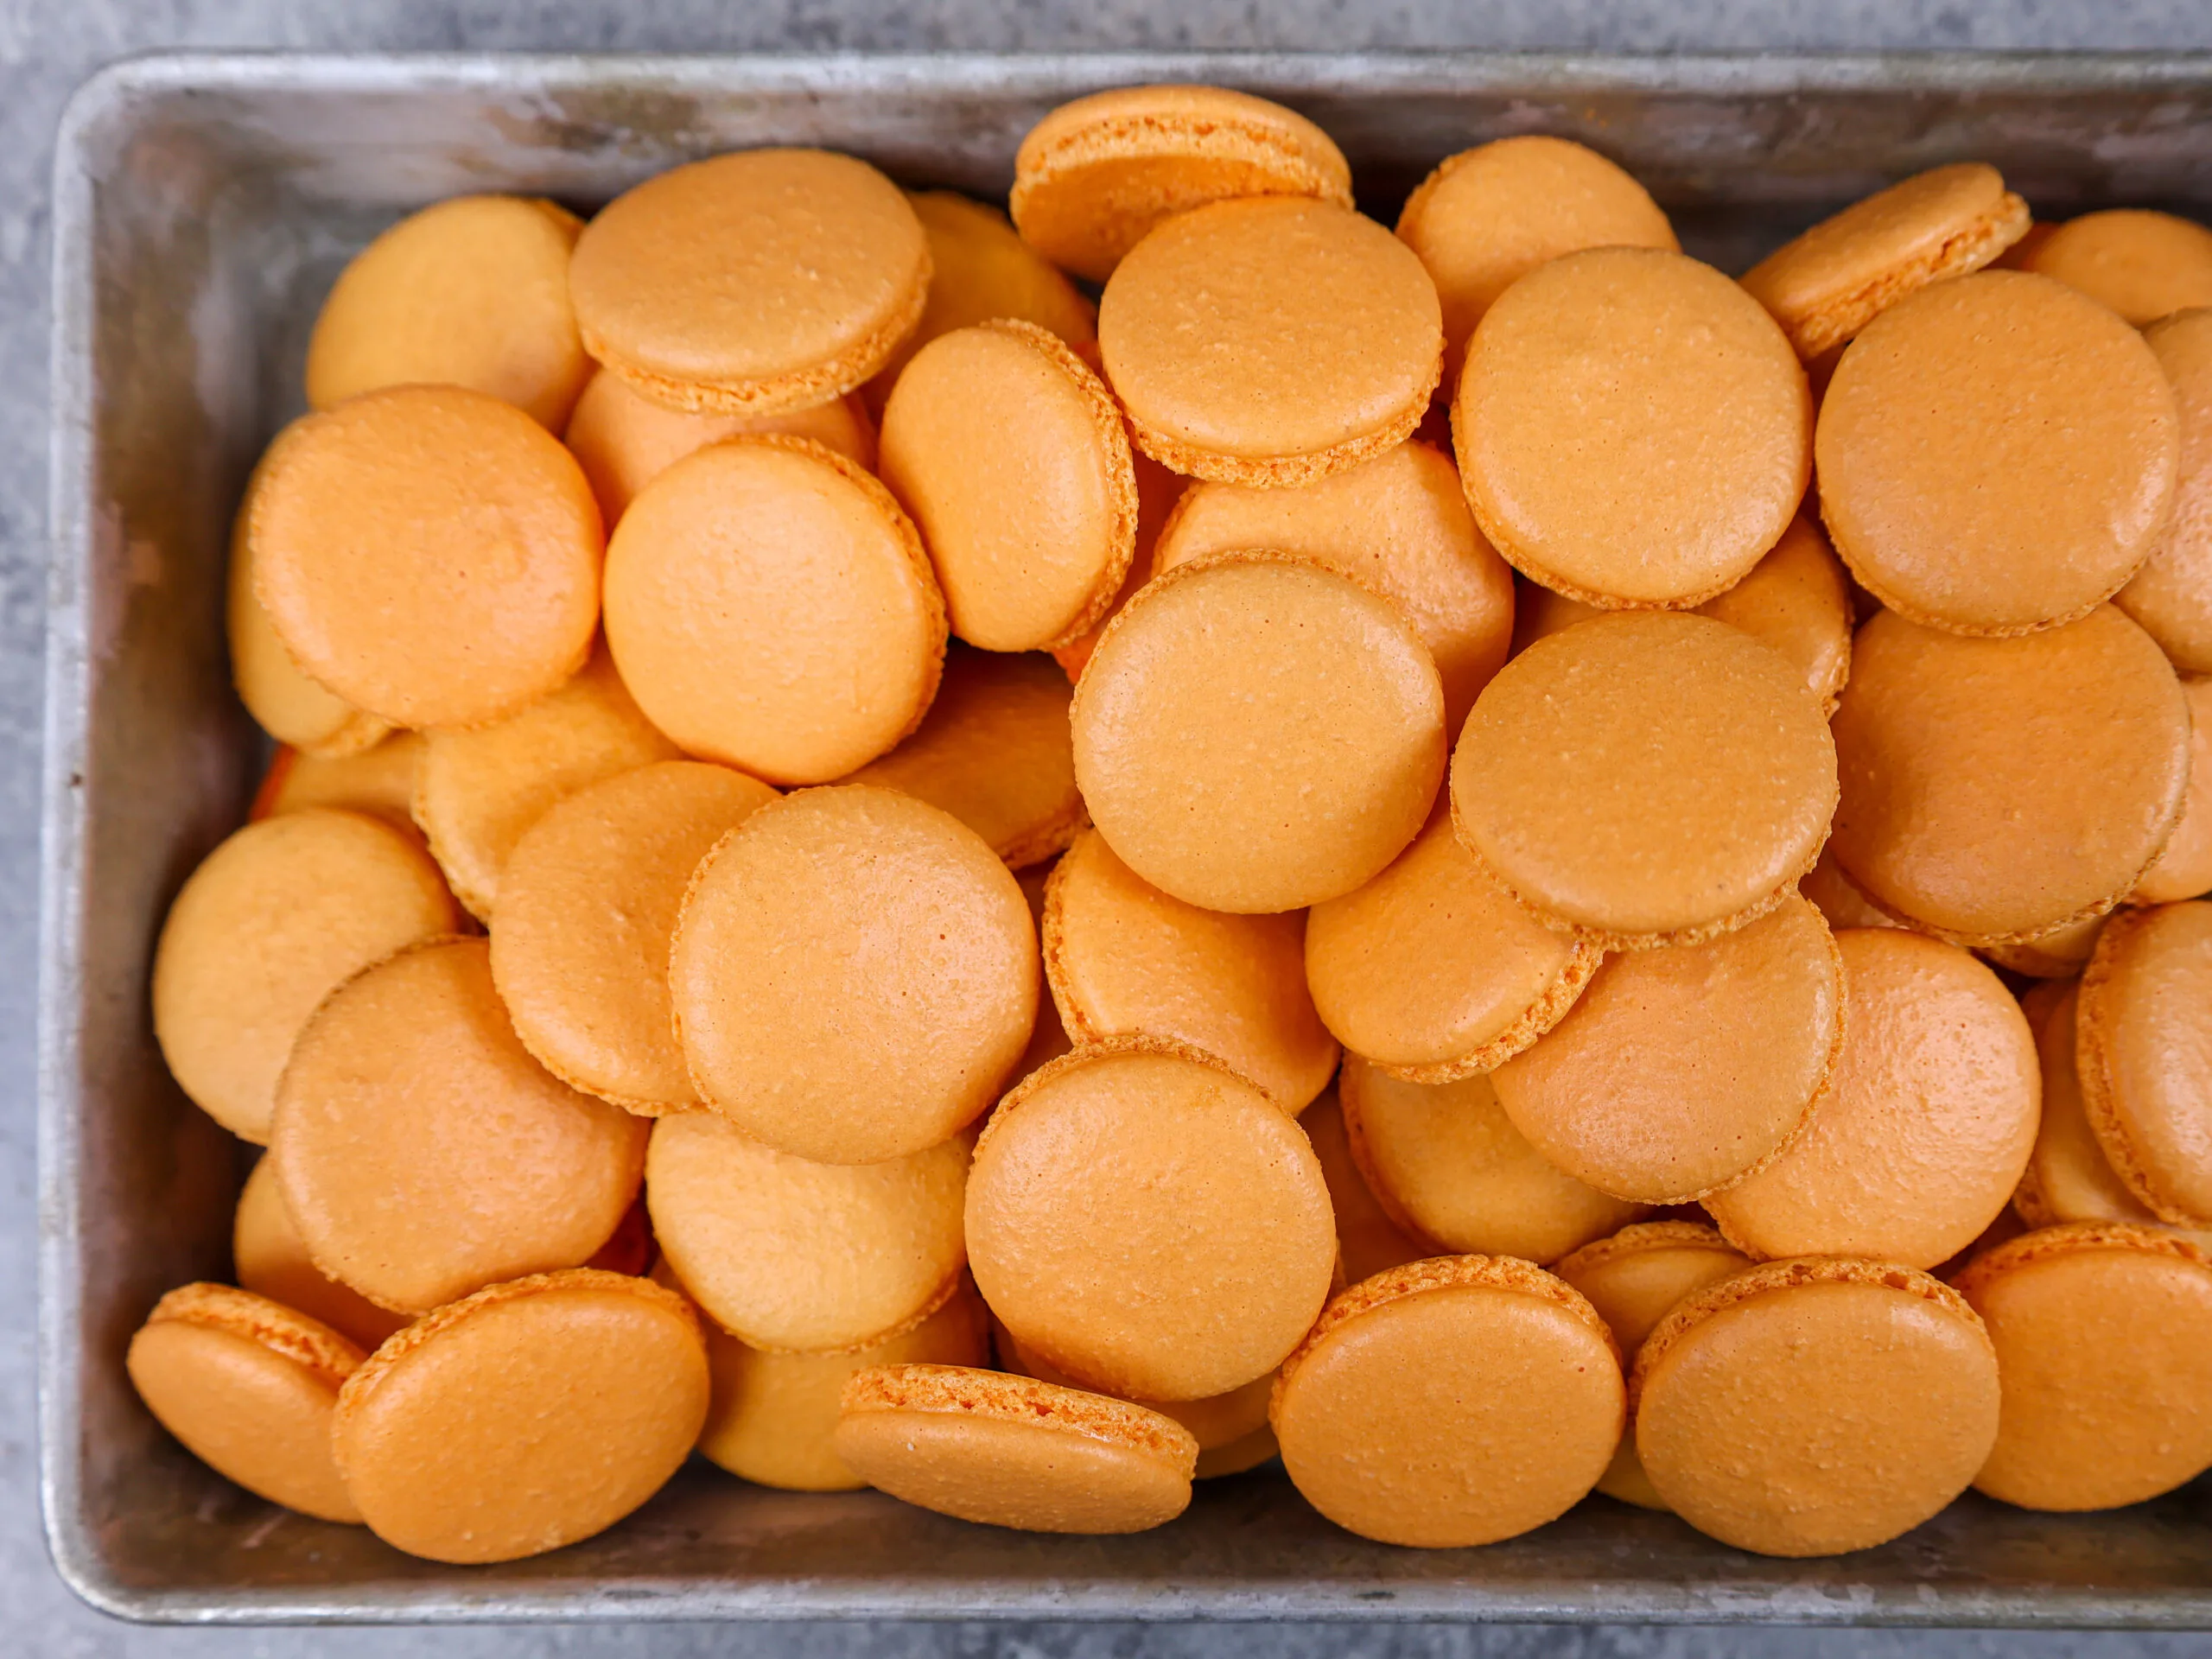 image of a tray of orange macaron shells that have been baked and cooled and are ready to be filled